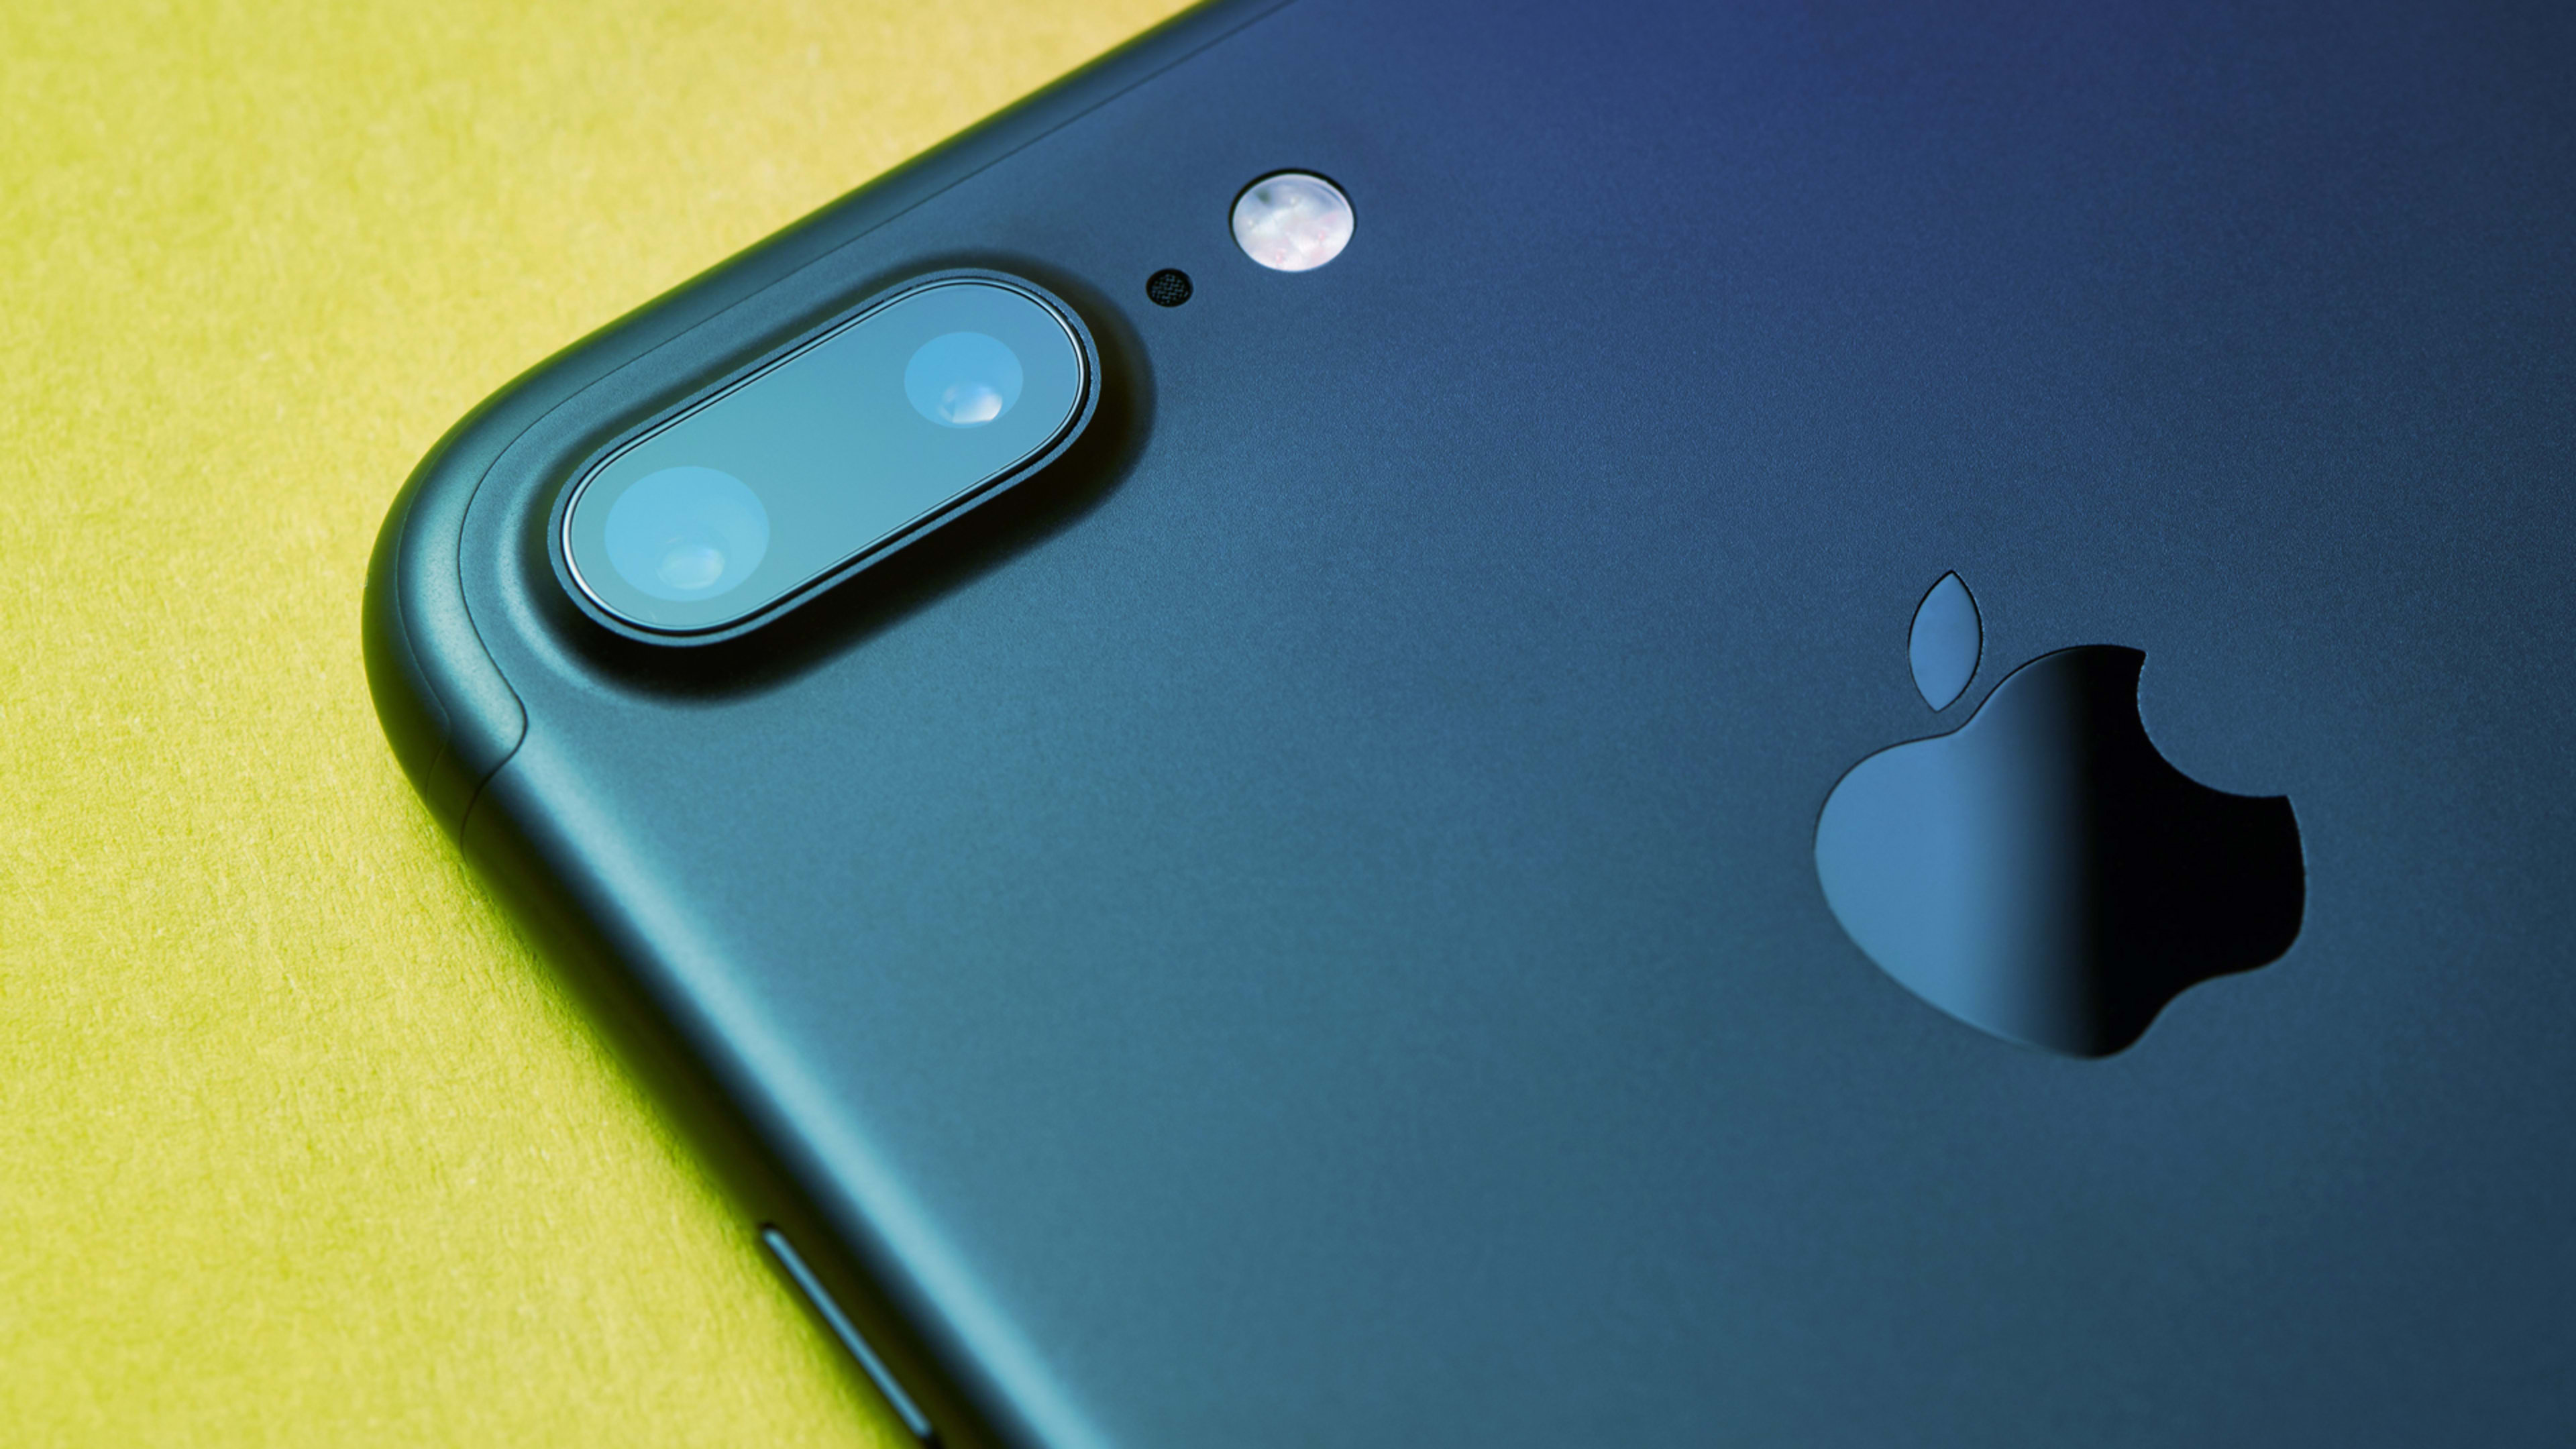 Apple will almost certainly unveil the iPhone 11 on September 10